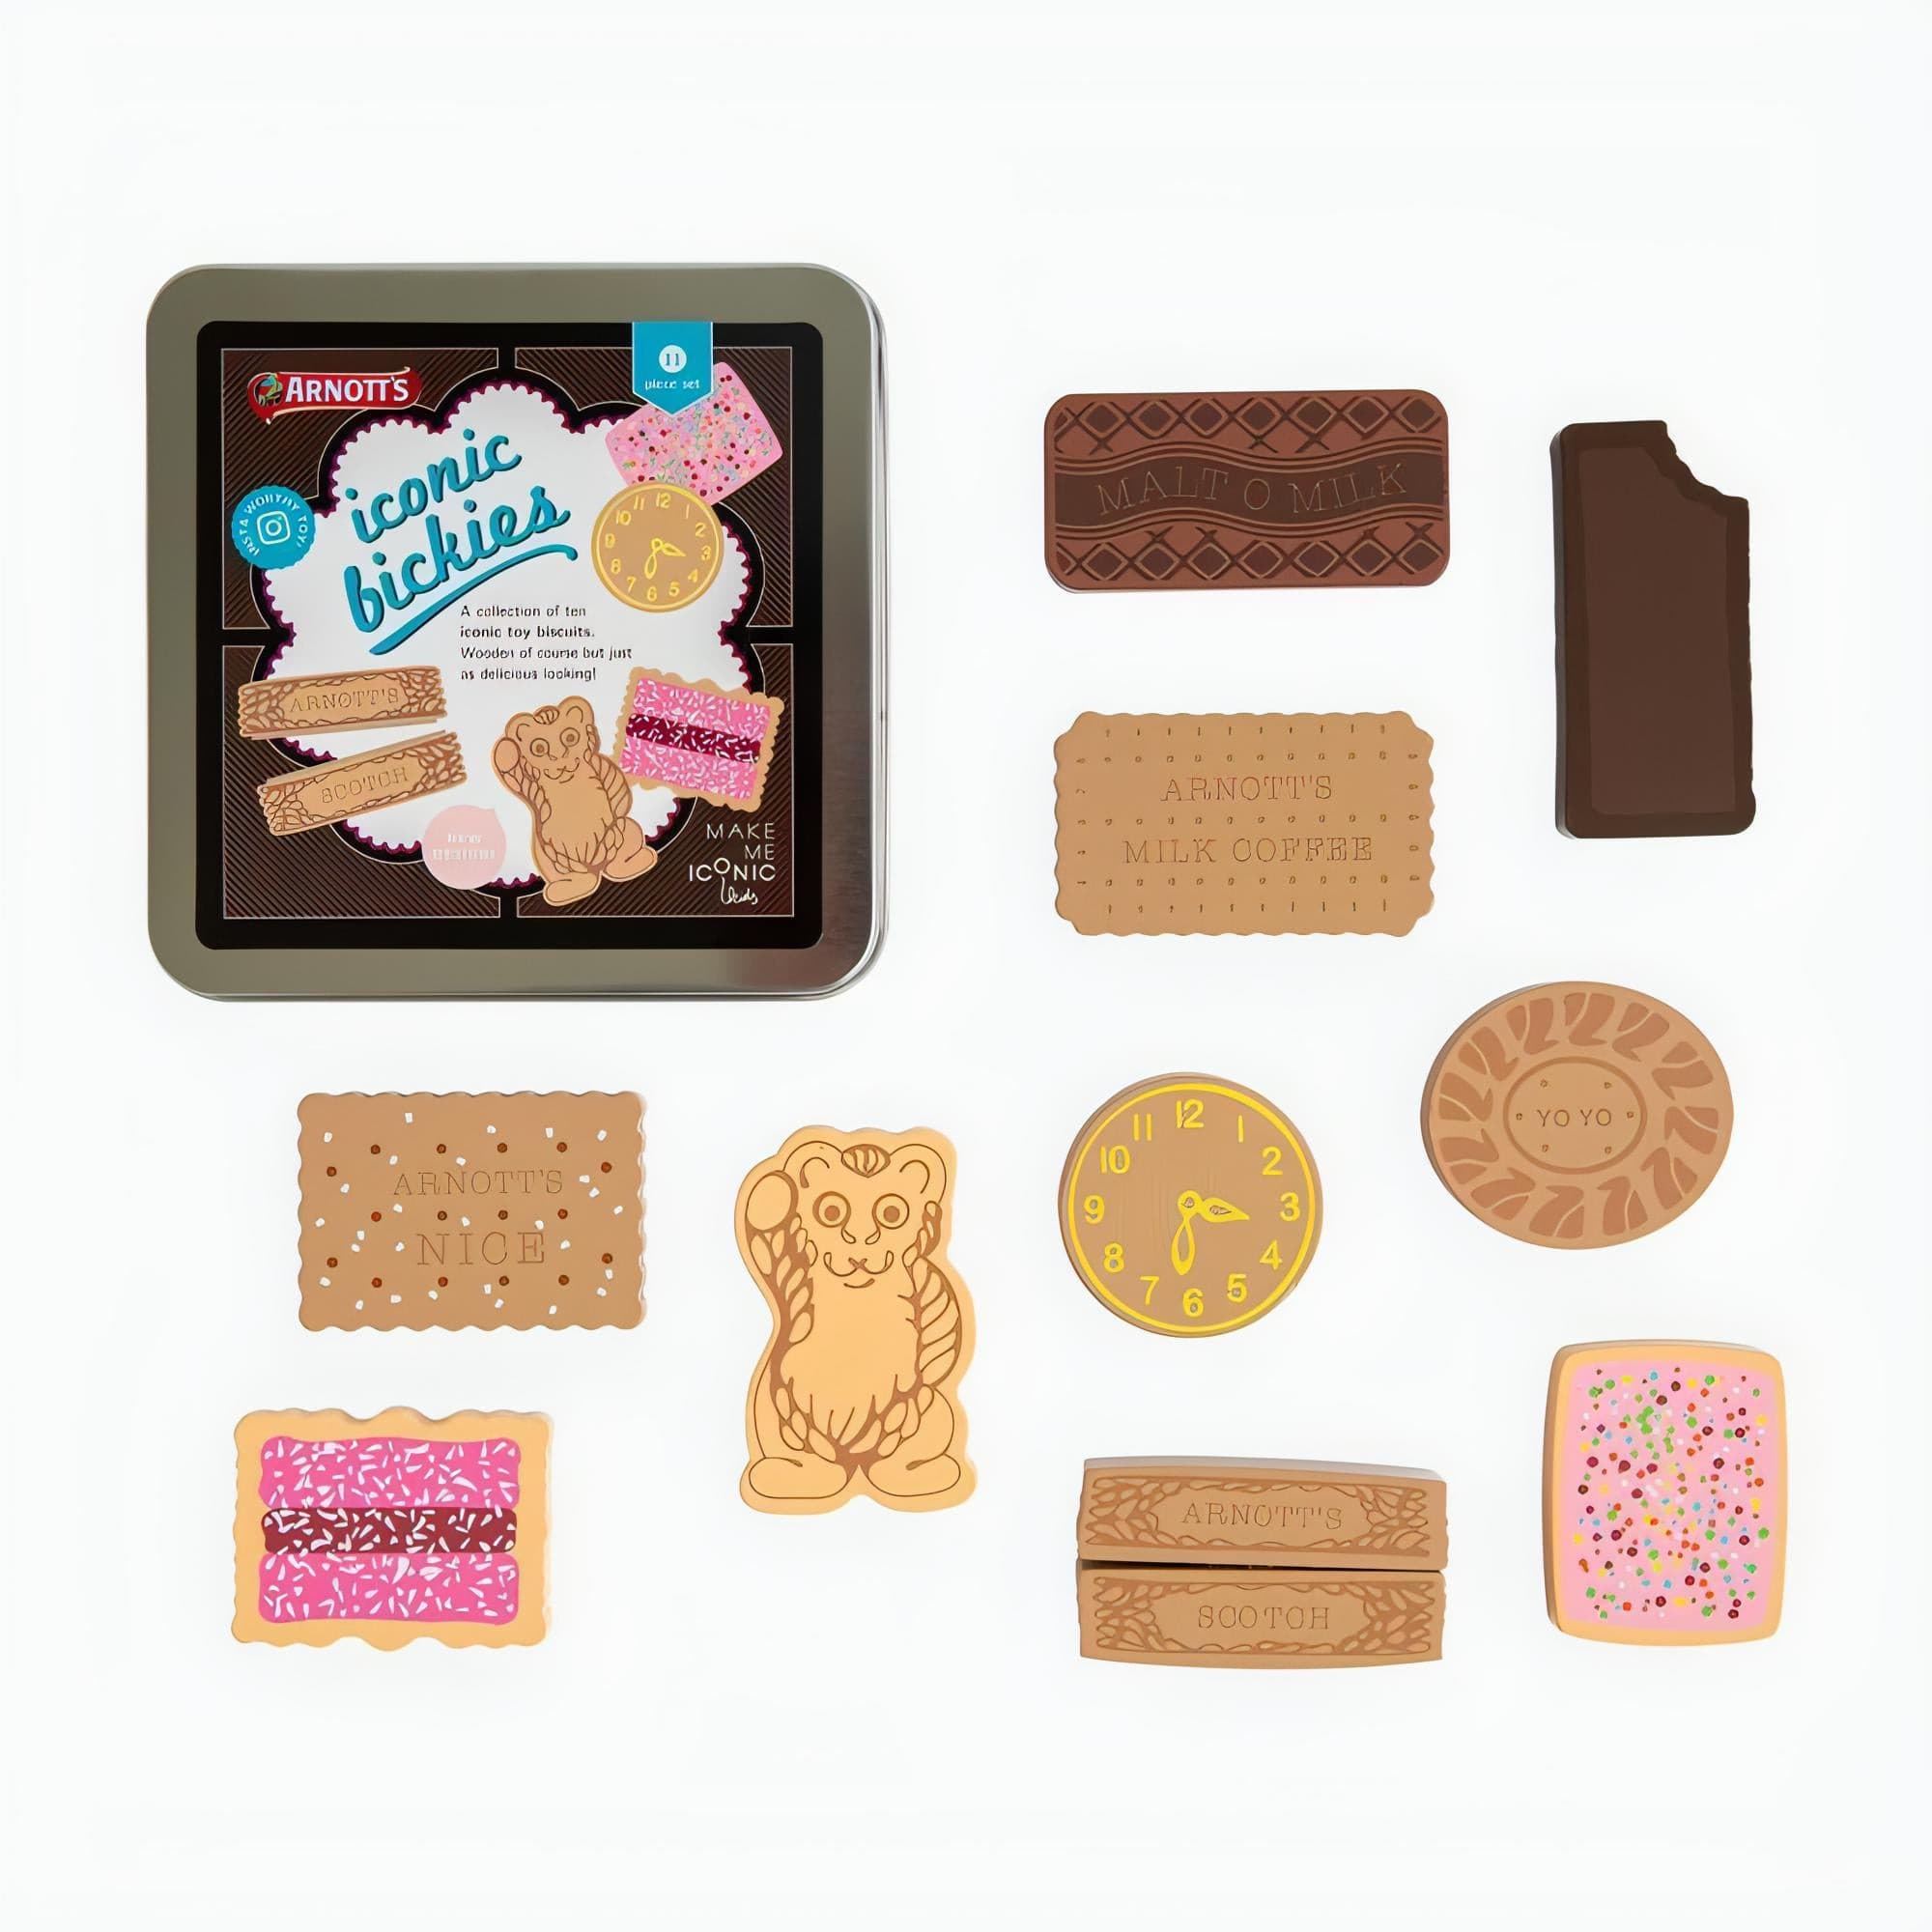 Australian Arnott's Biscuit Bickies by Make me Iconic - Lily Sprout Collection